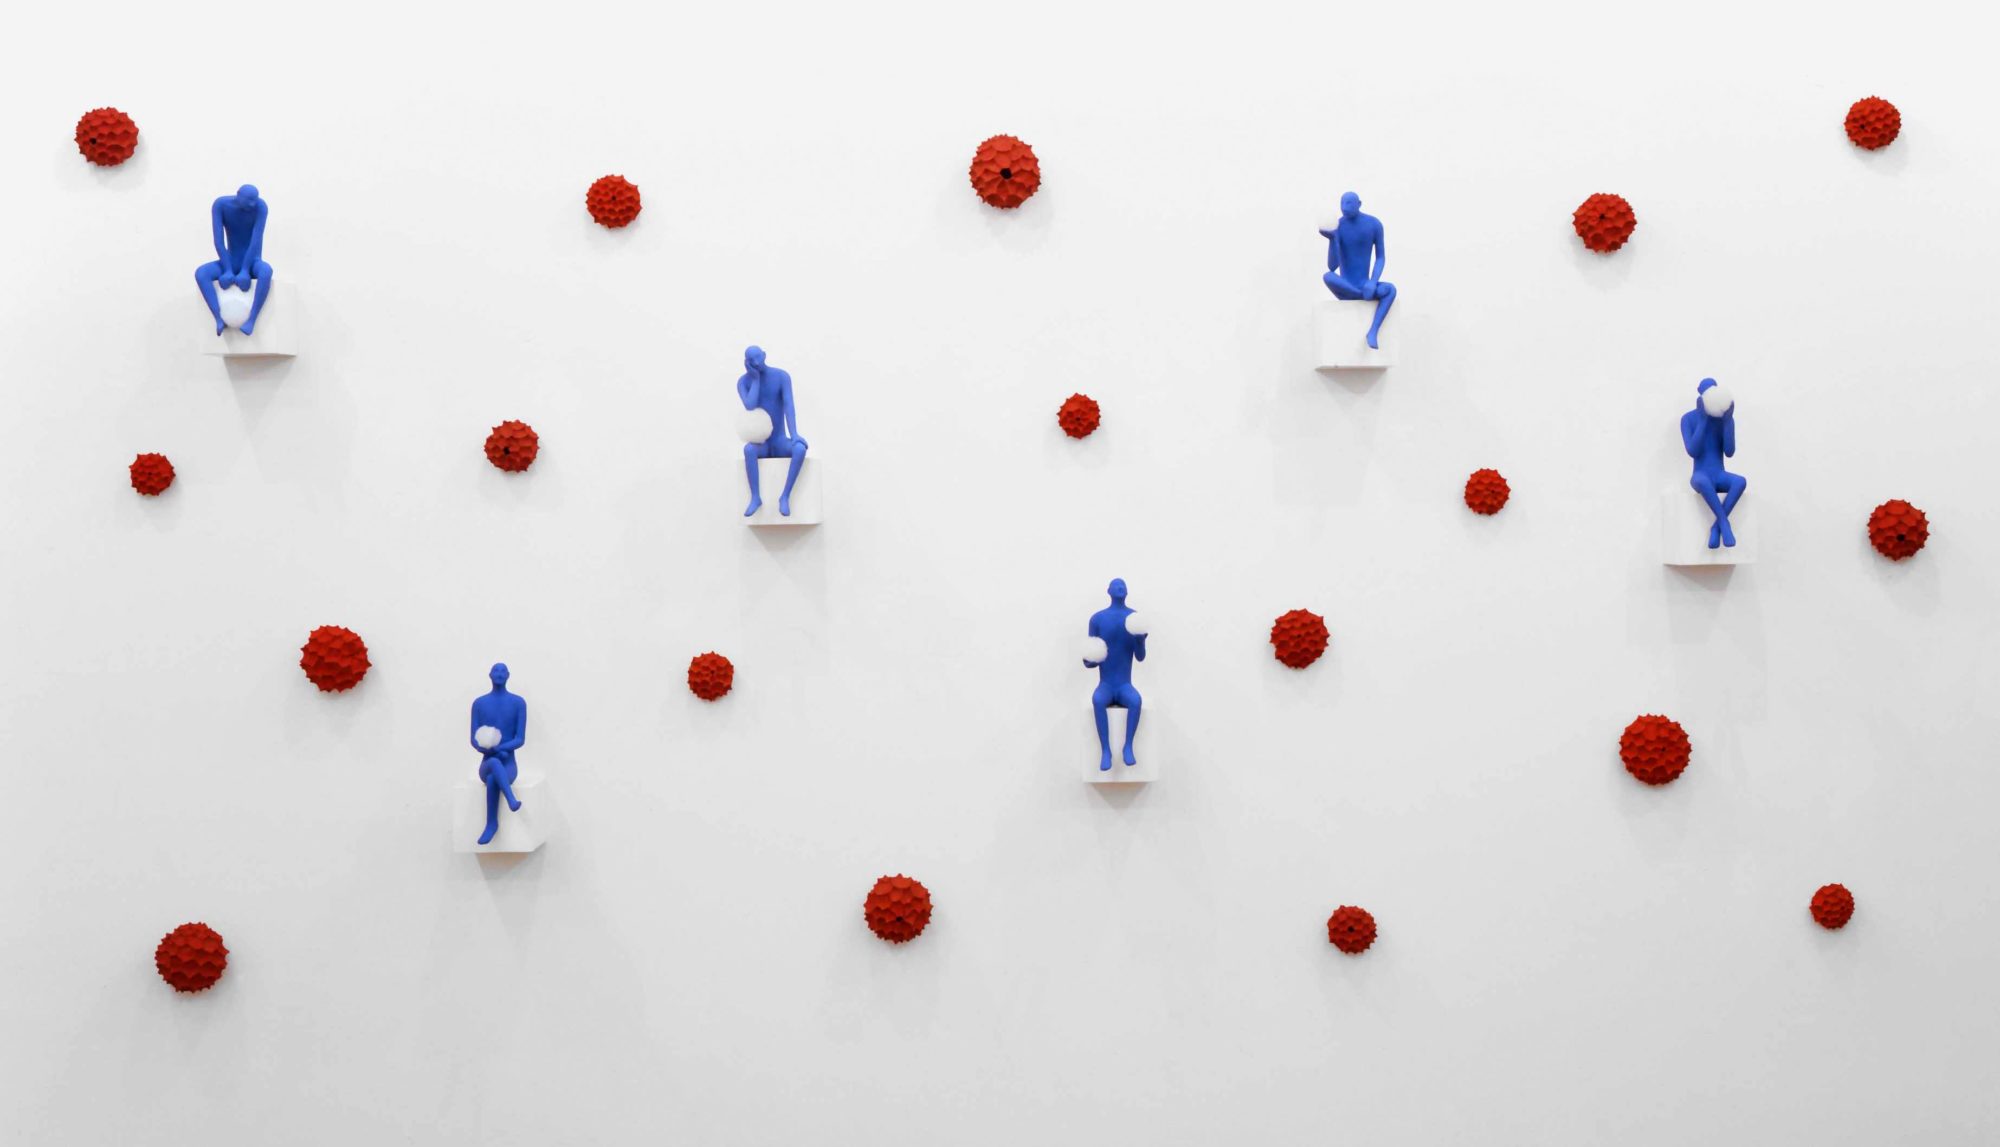 An installation Set up Blue men by Kazumasa Mizokami at the Toselli Gallery in 1995 in Milan. that uses six small blue statues set up on the wall and open space is accompanied by 18 red flower photo by Stefano Cavallo